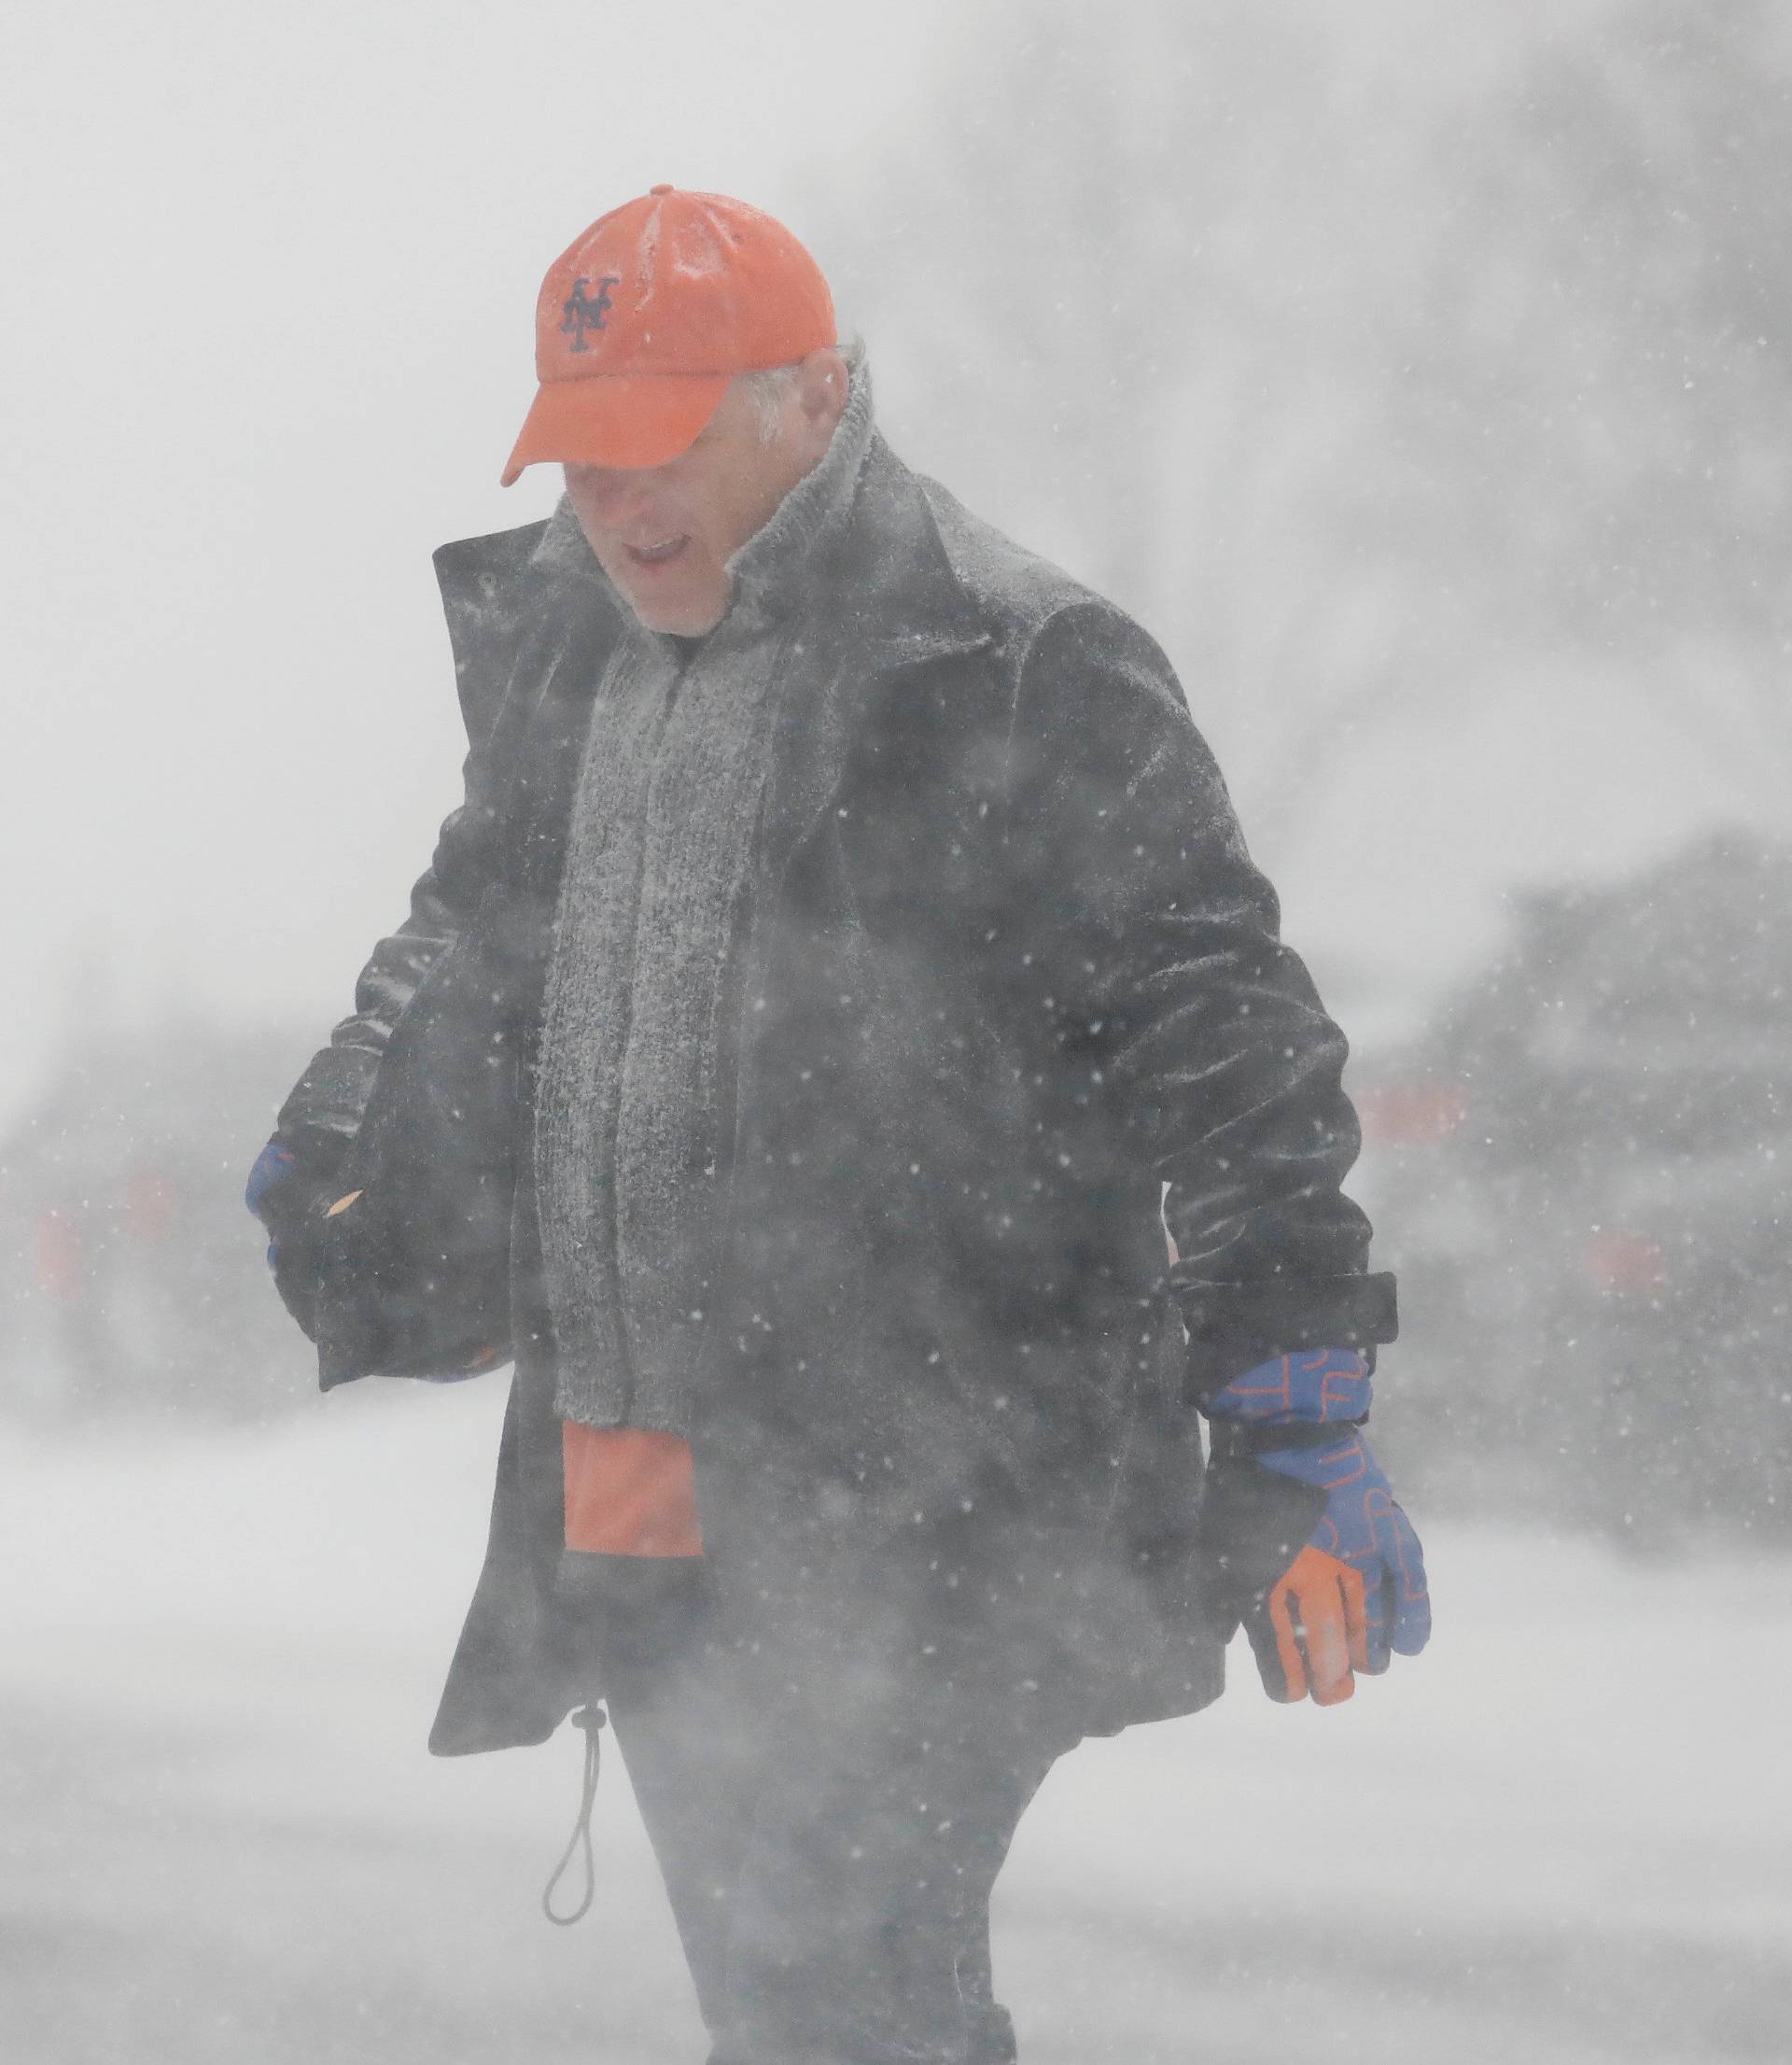 A man crosses the street during a blizzard in Long Beach, New York